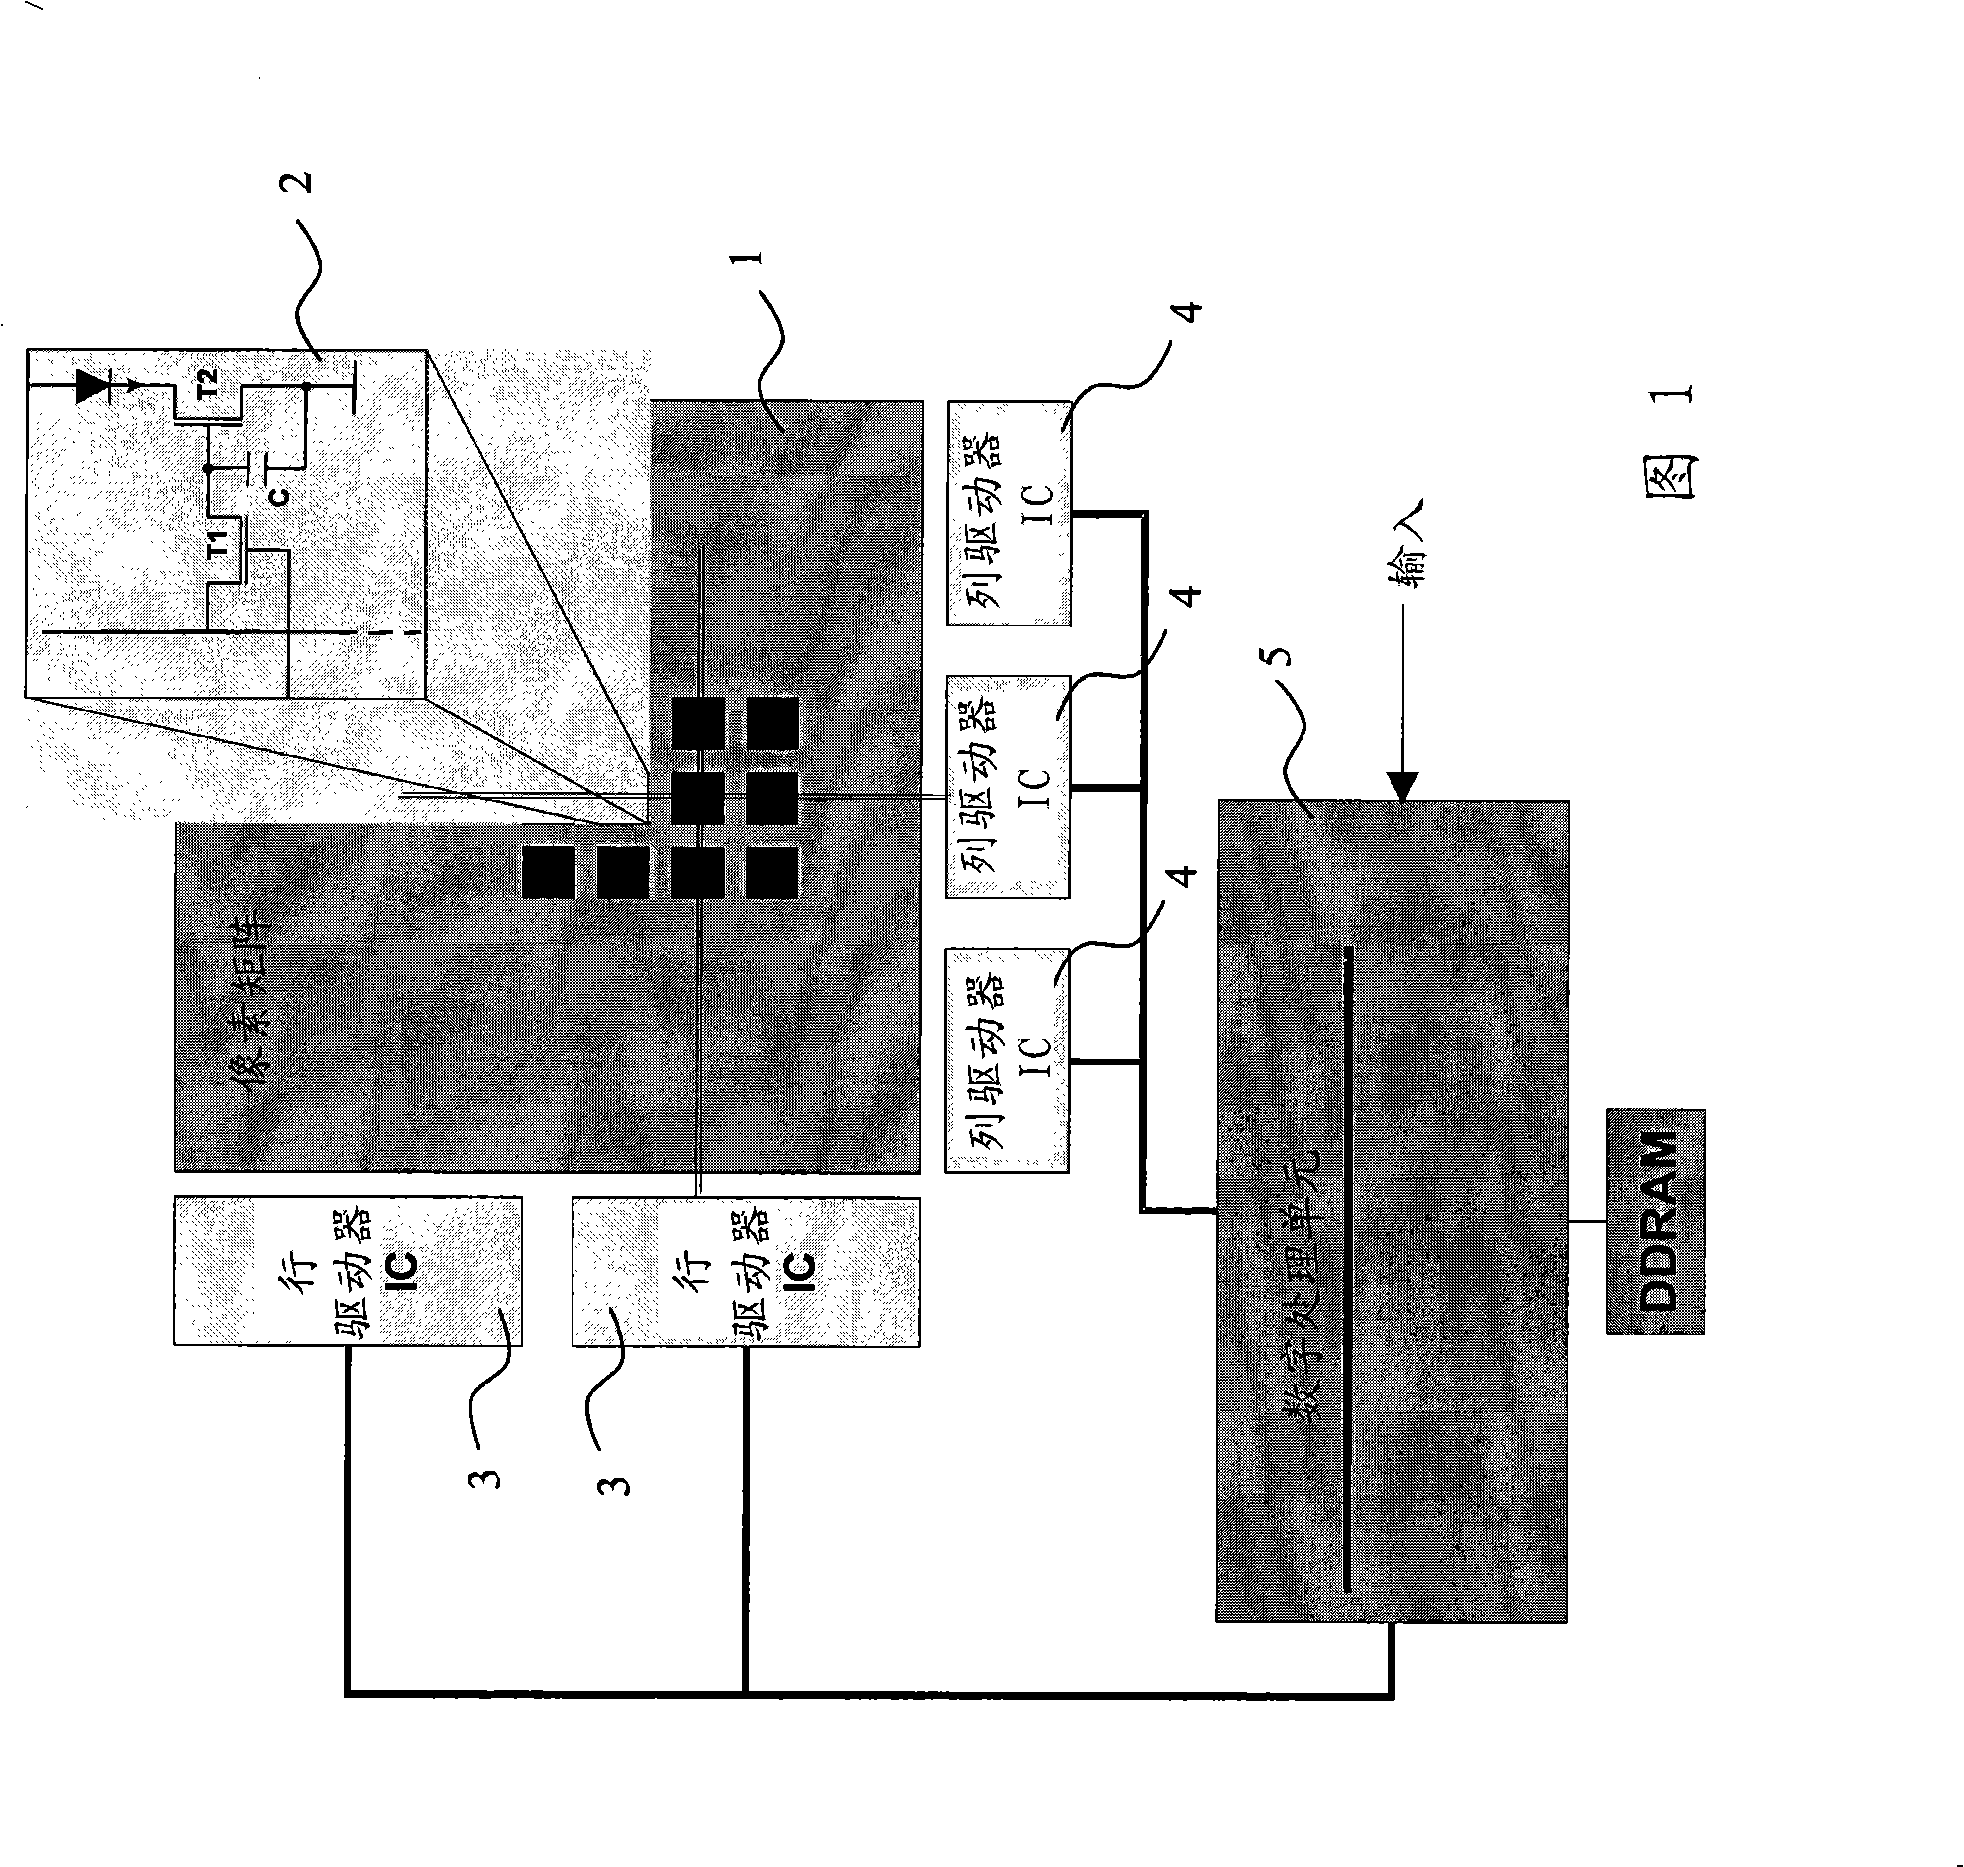 Method for displaying an image on an organic light emitting display and respective apparatus